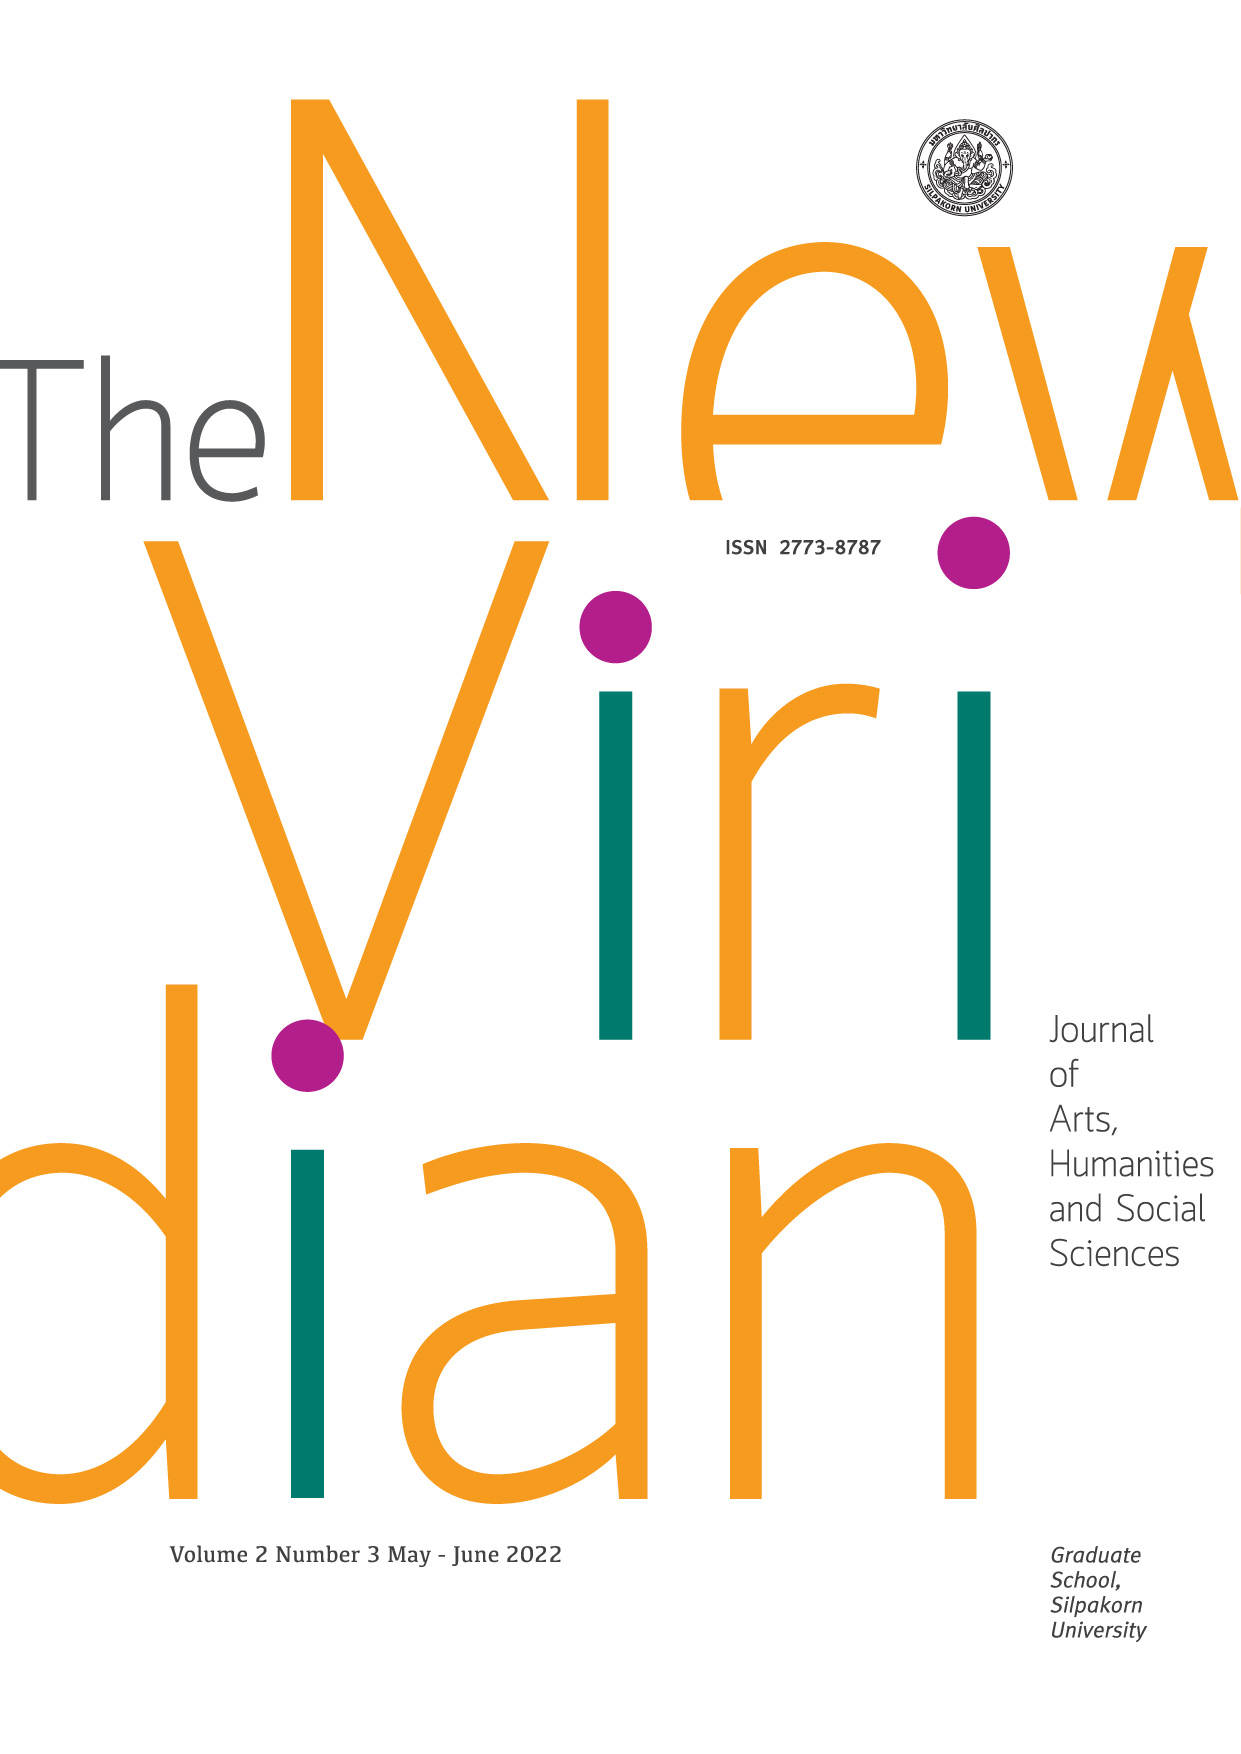 					View Vol. 2 No. 3 (2022): The New Viridian Journal of Arts, Humanities and Social Sciences ( May – June 2022)
				